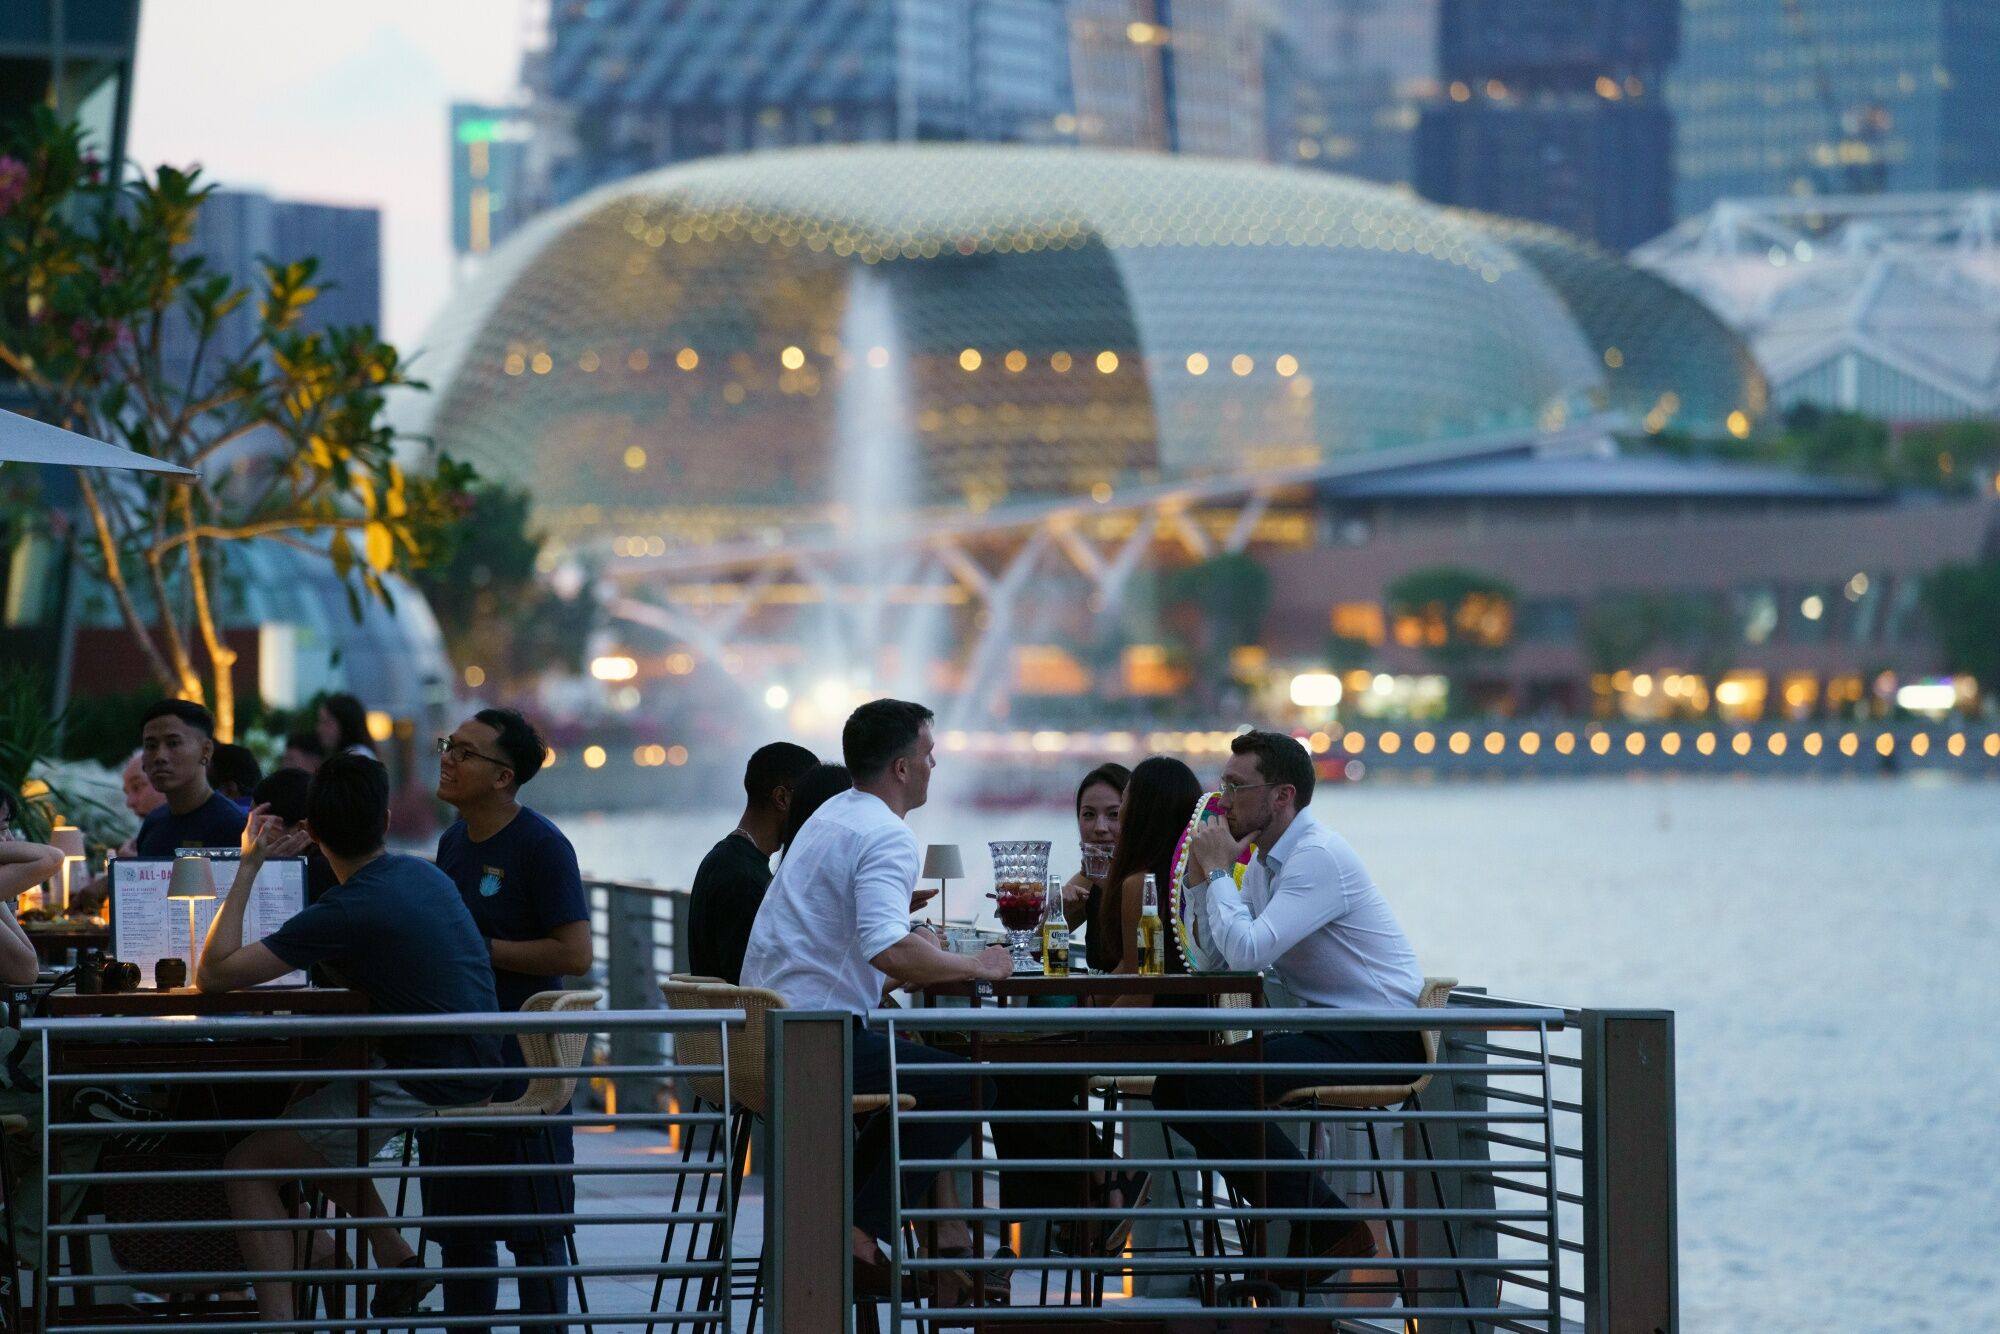 Prime Minister Lee Hsien Loong said Singapore needs talent to stand out in the world. Photo: Bloomberg